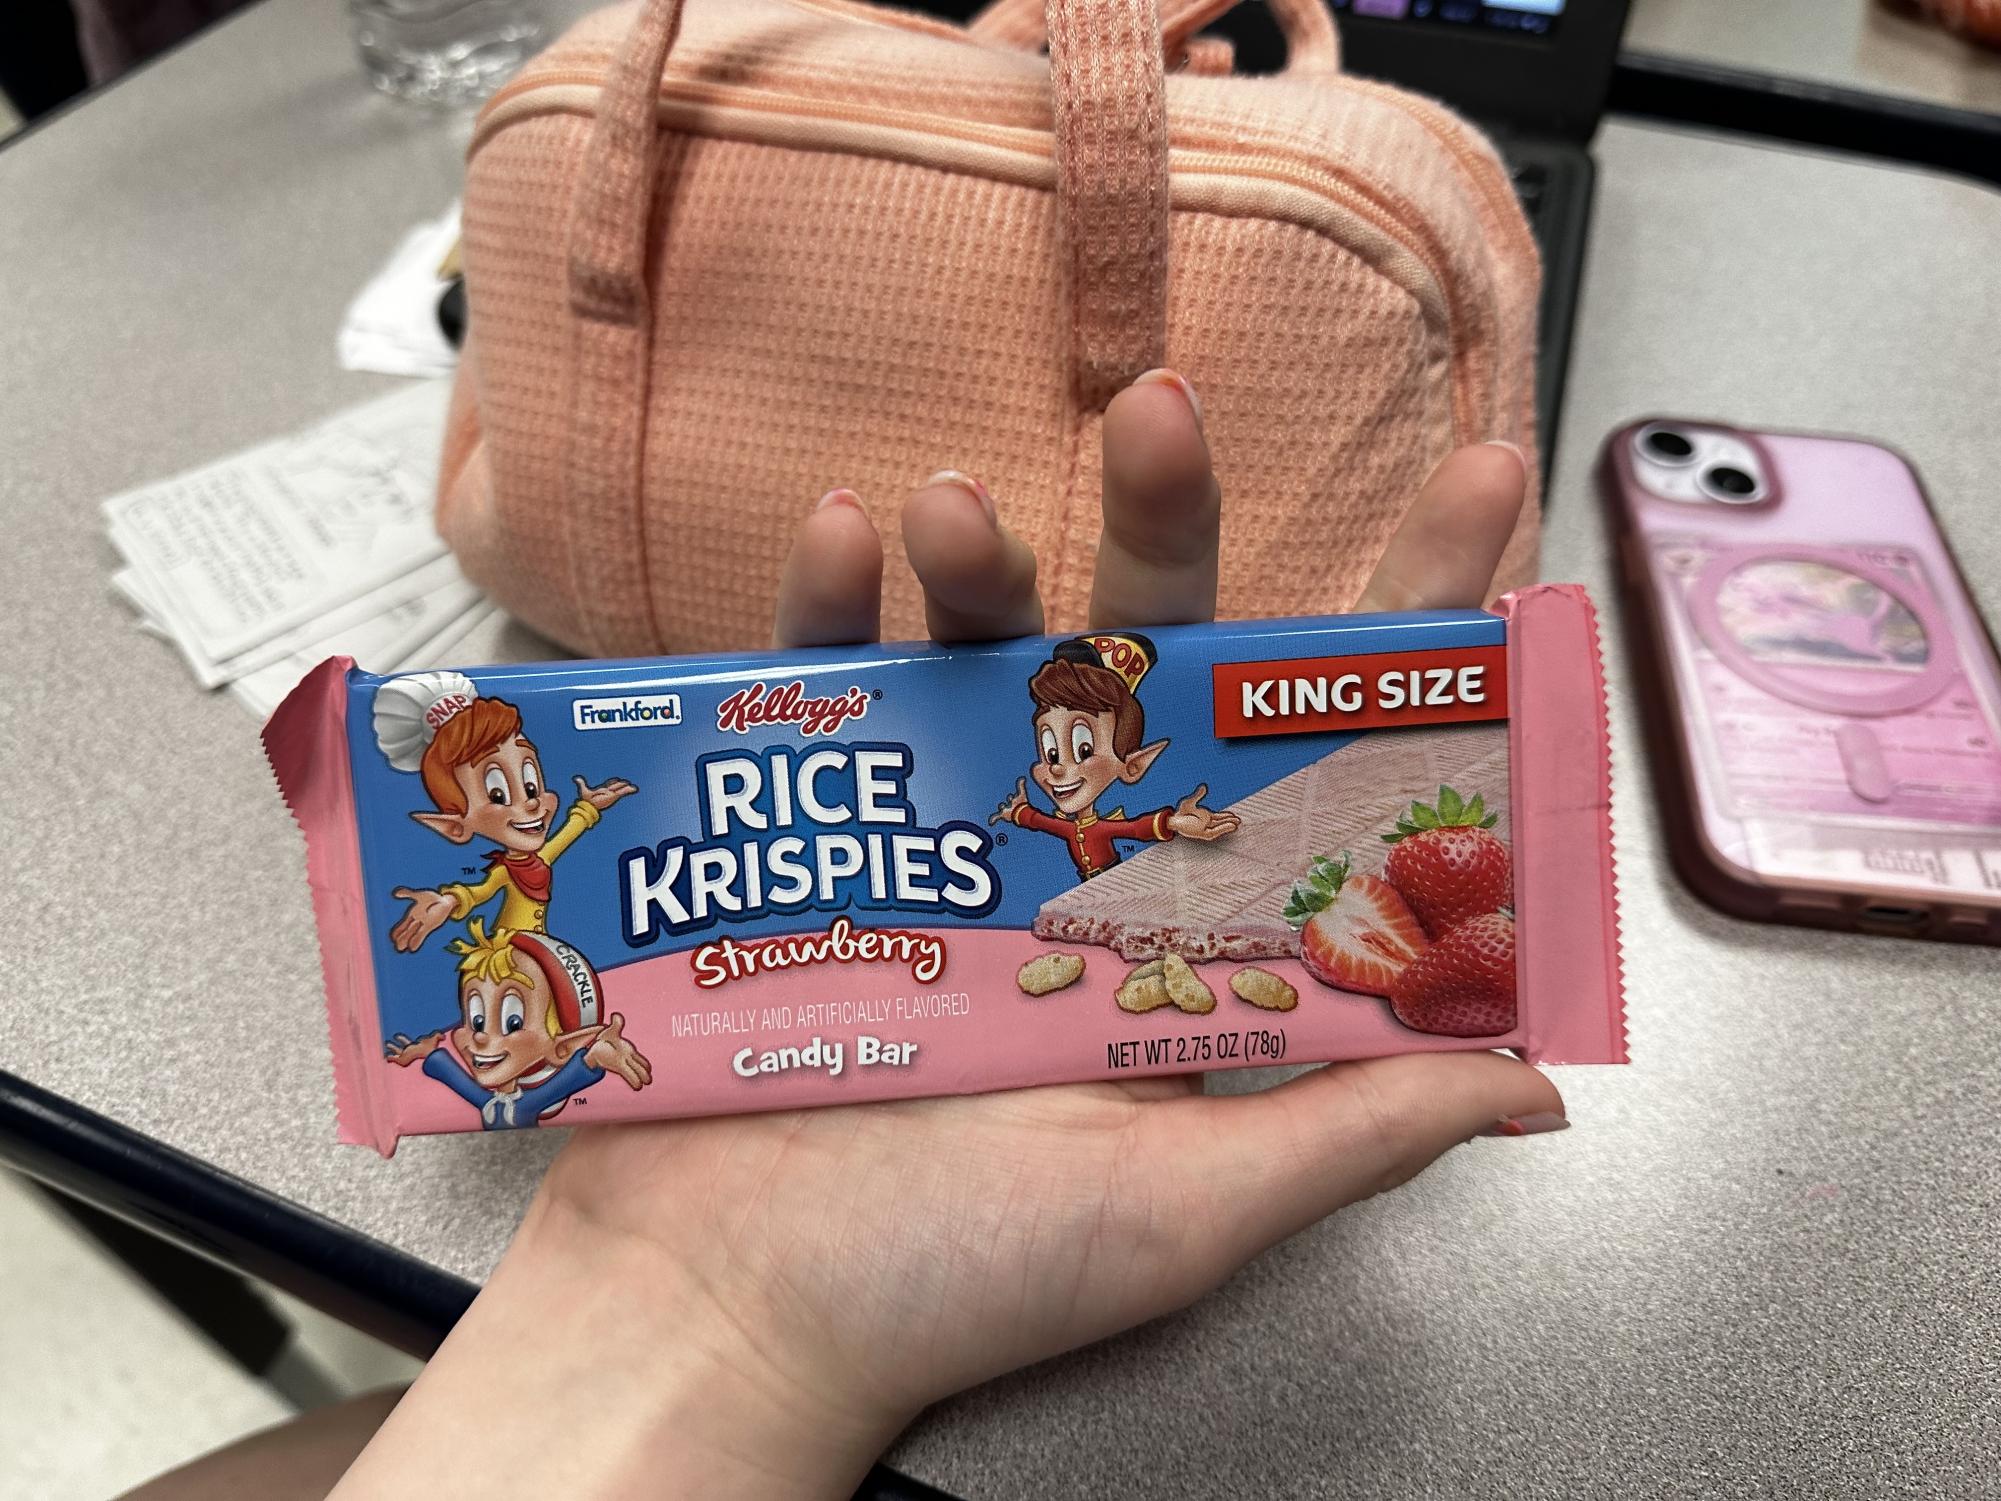 The bar has a spattering of Rice Krispies cereal with a white chocolate base that was artificially flavored to taste like strawberries.